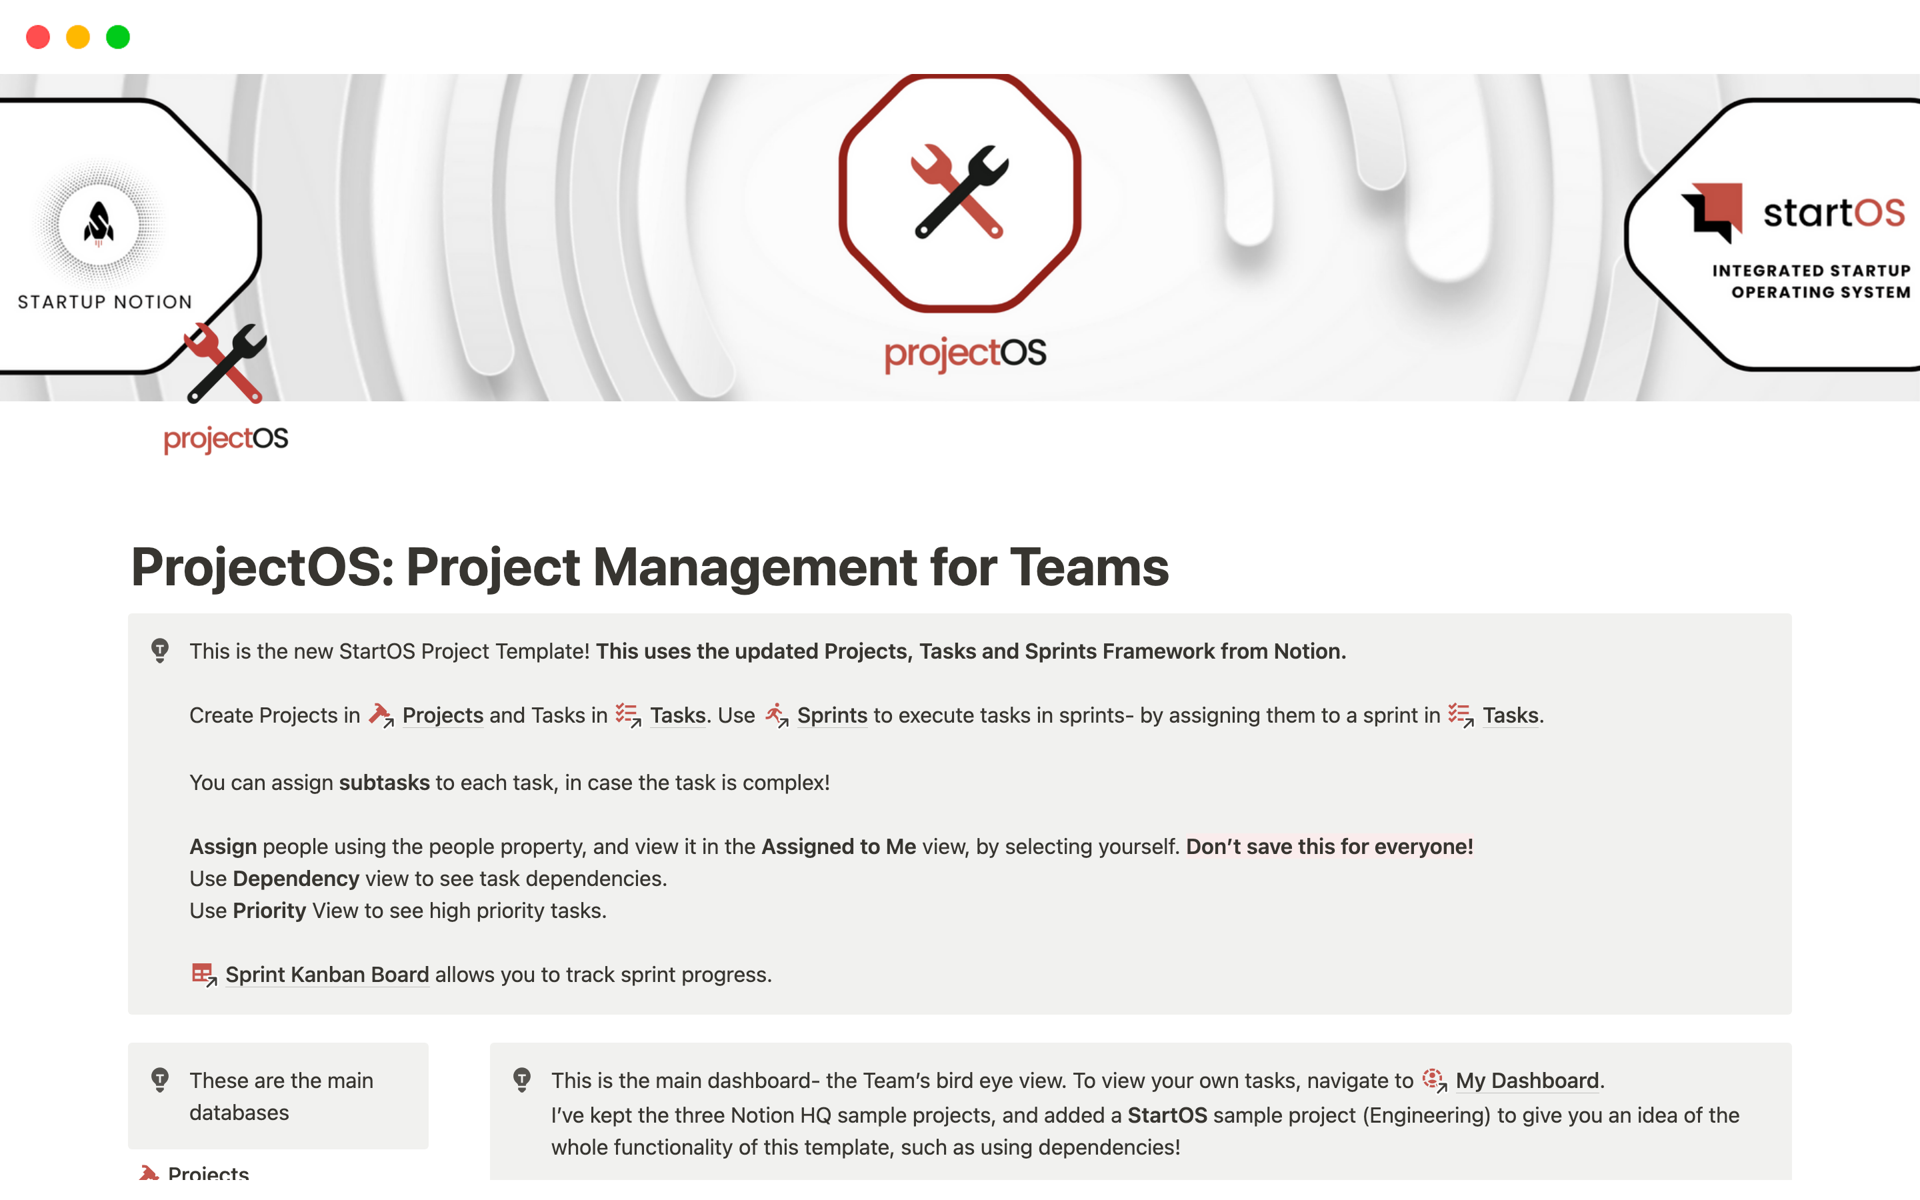 ProjectOS: Project Management for Teamsのテンプレートのプレビュー